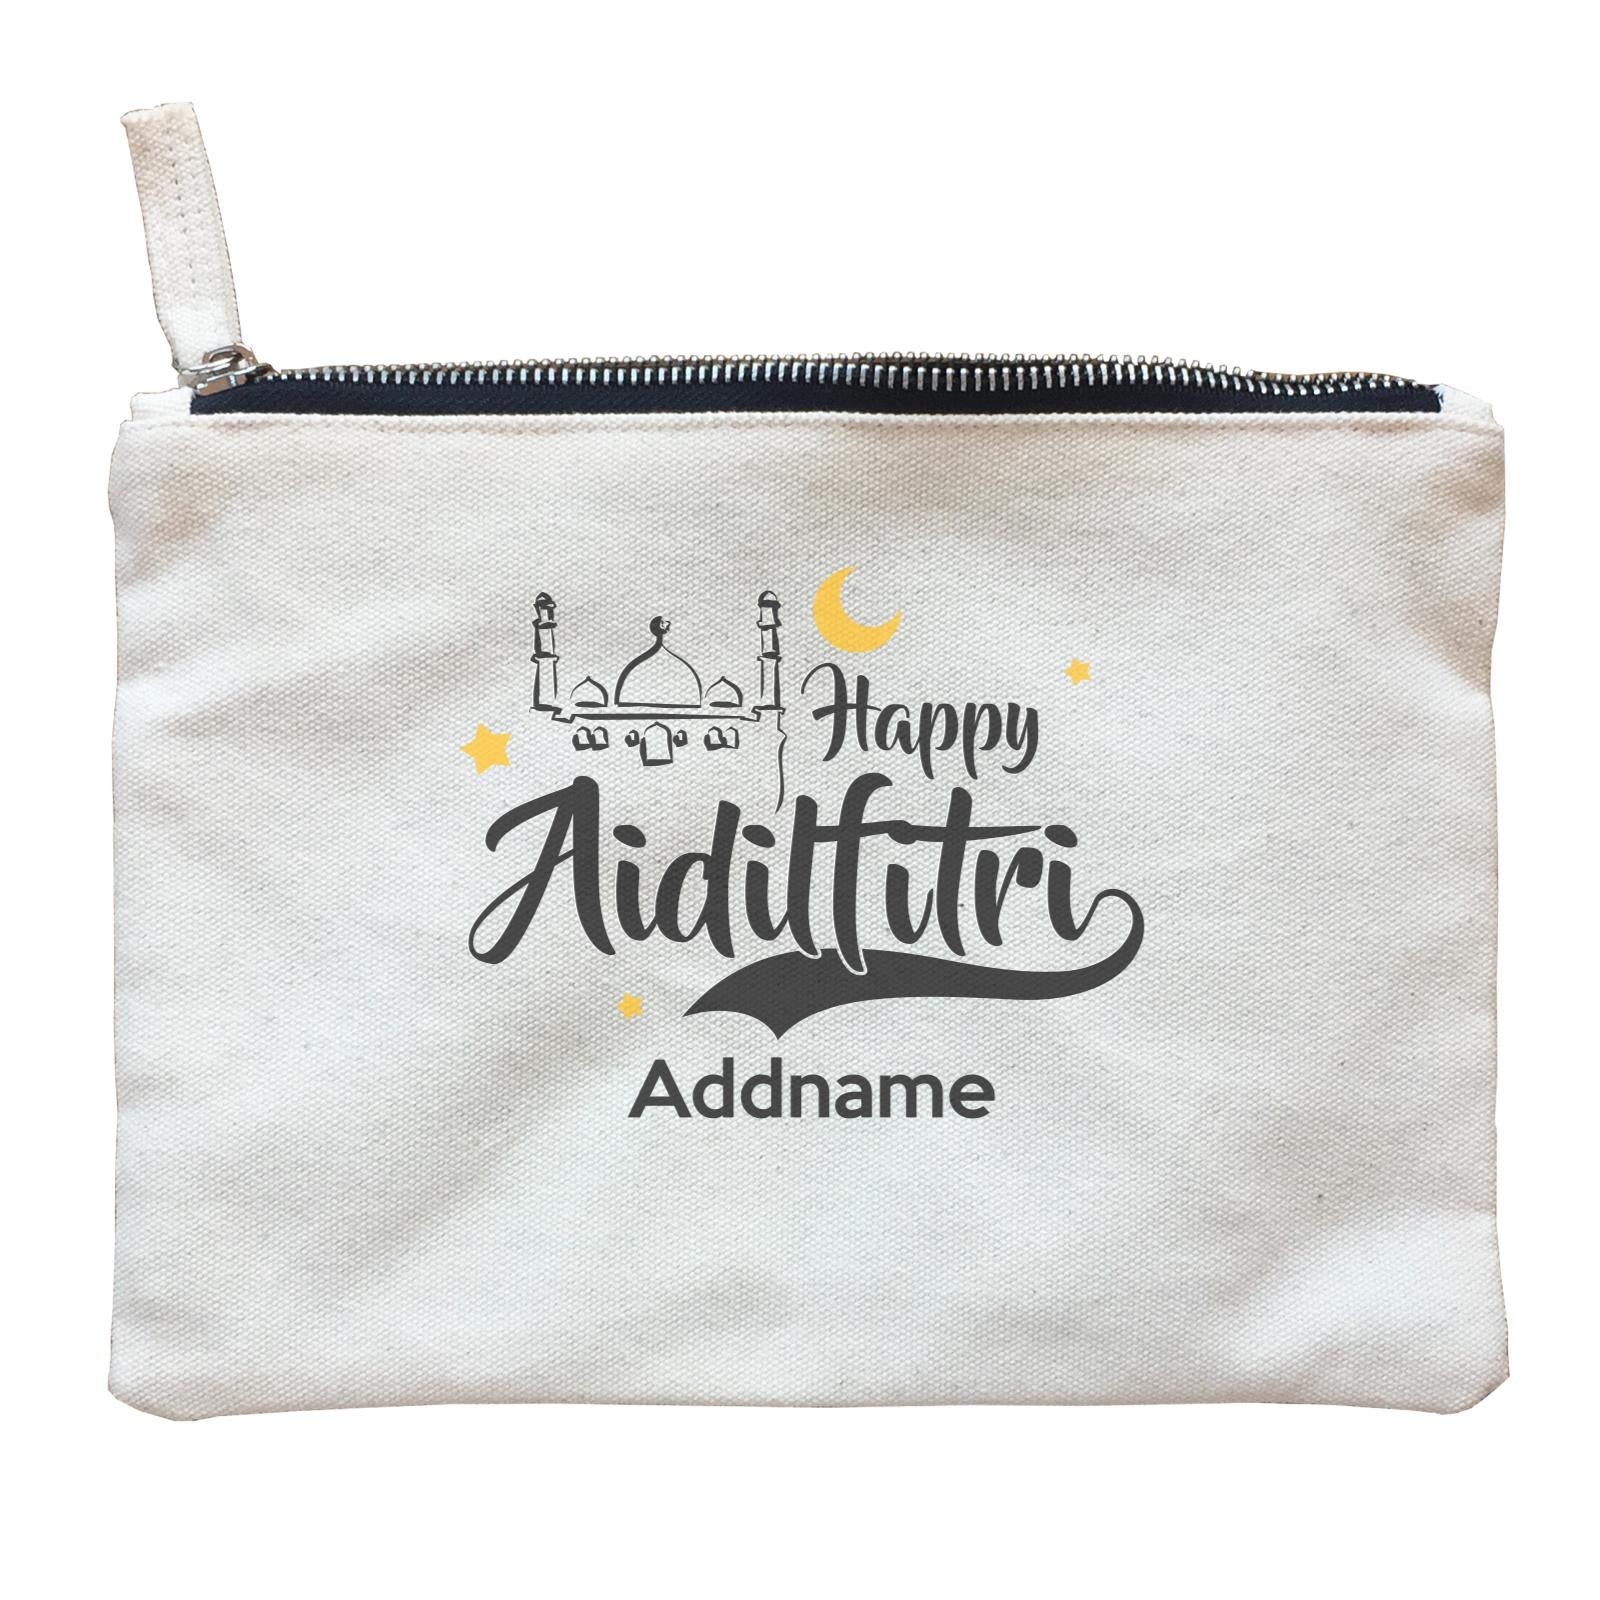 Raya Typography Doodle Mosque Happy Aidilfitri Addname Zipper Pouch